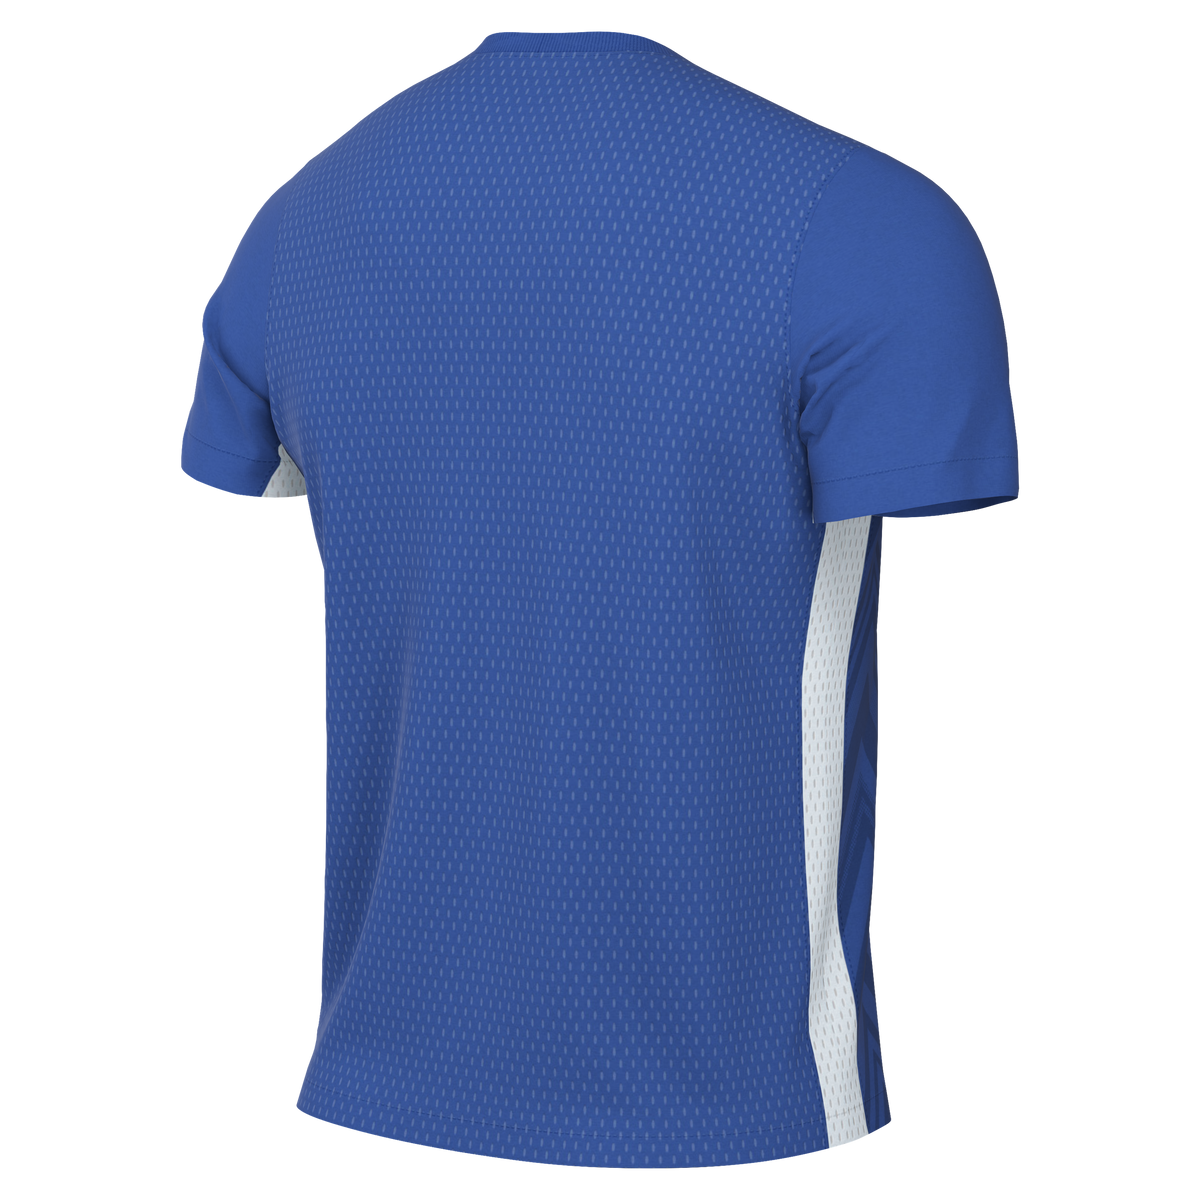 Nike Dri-FIT Challenge Jersey V Short Sleeve (Youth)